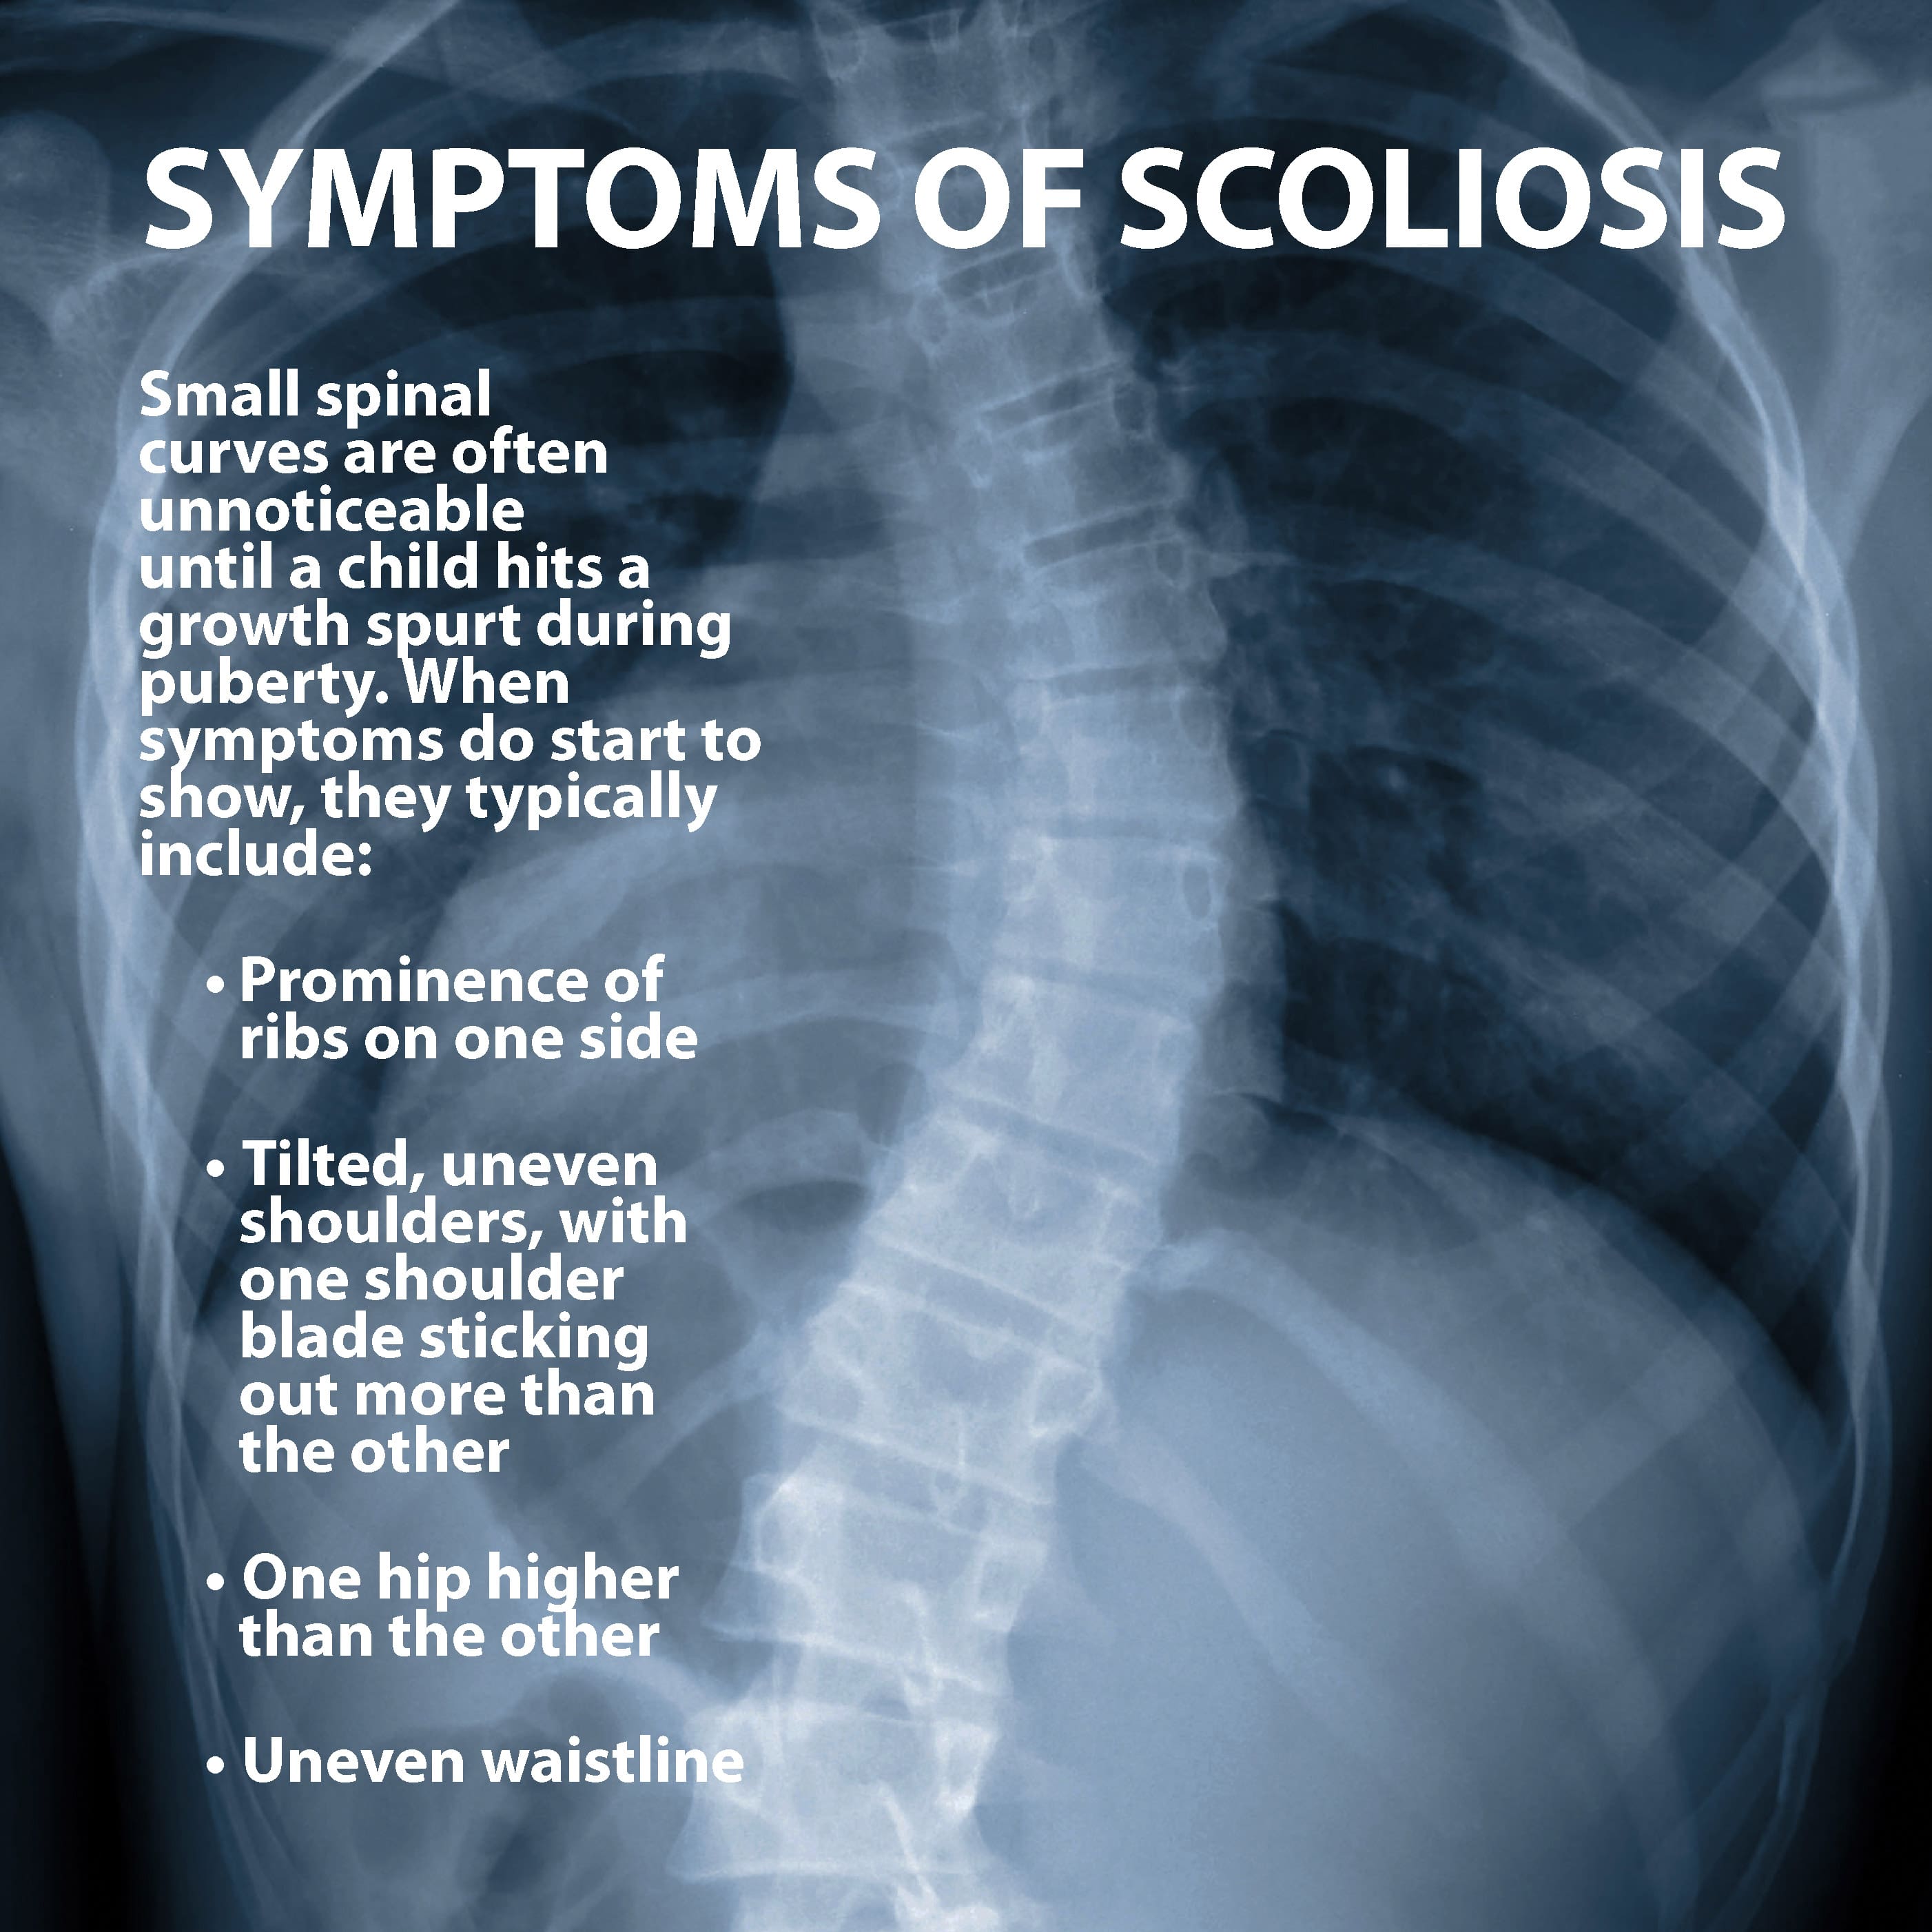 What medical conditions cause scoliosis?